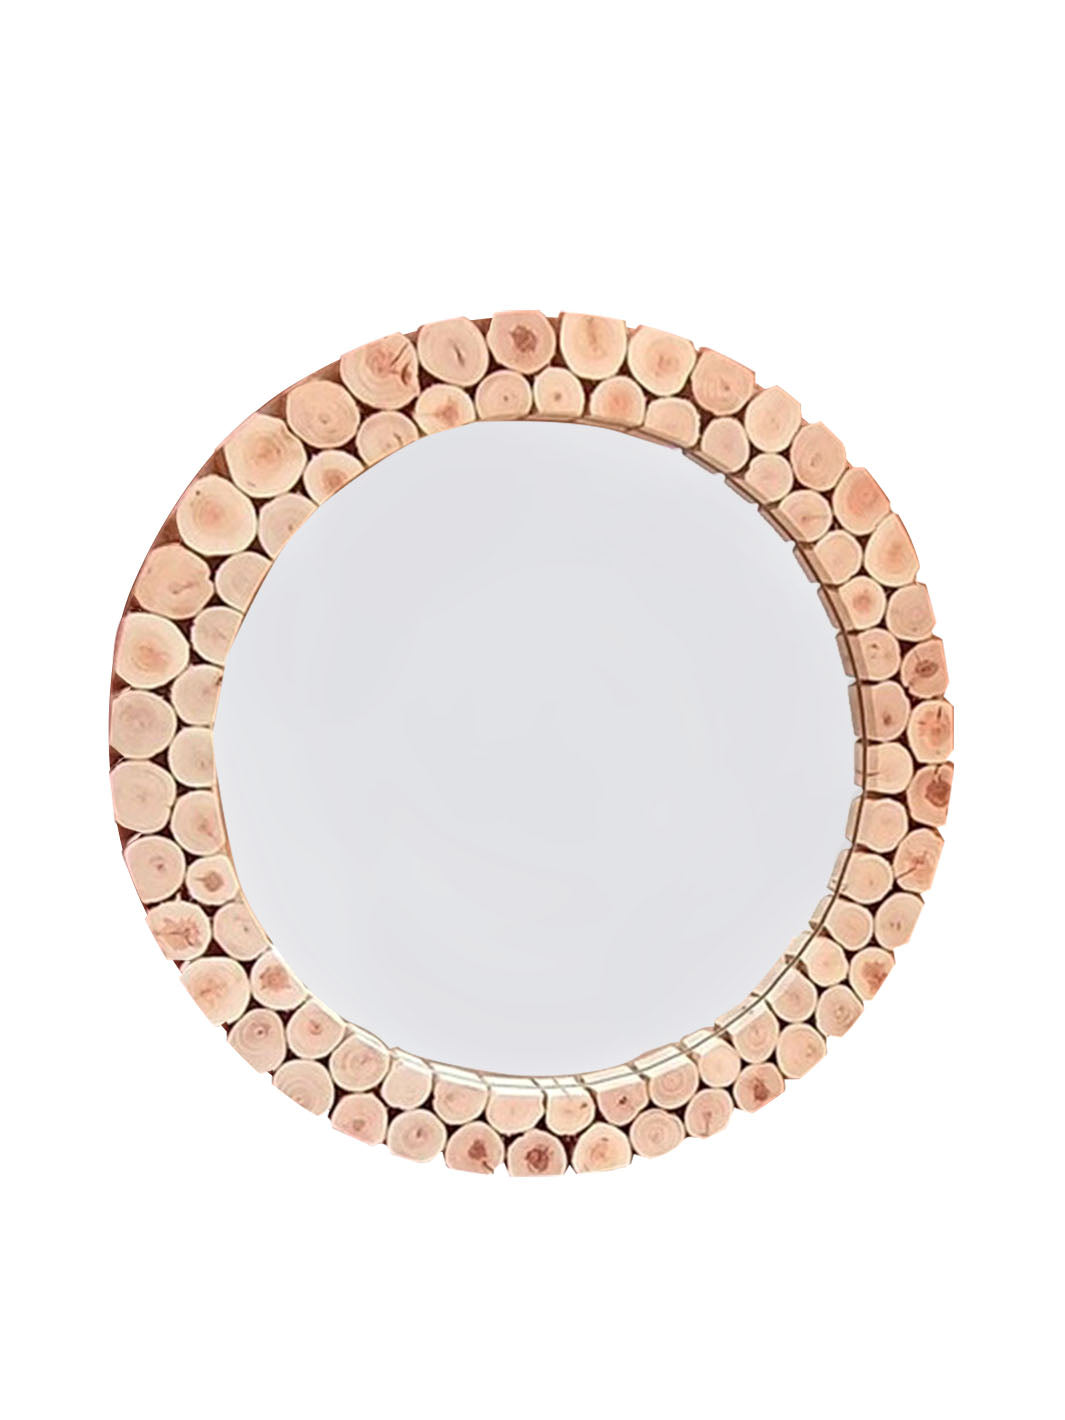 Handcrafted Large Rounded Wooden Wall Mirror | 80 cm Libitii Mirrors LIB-0189